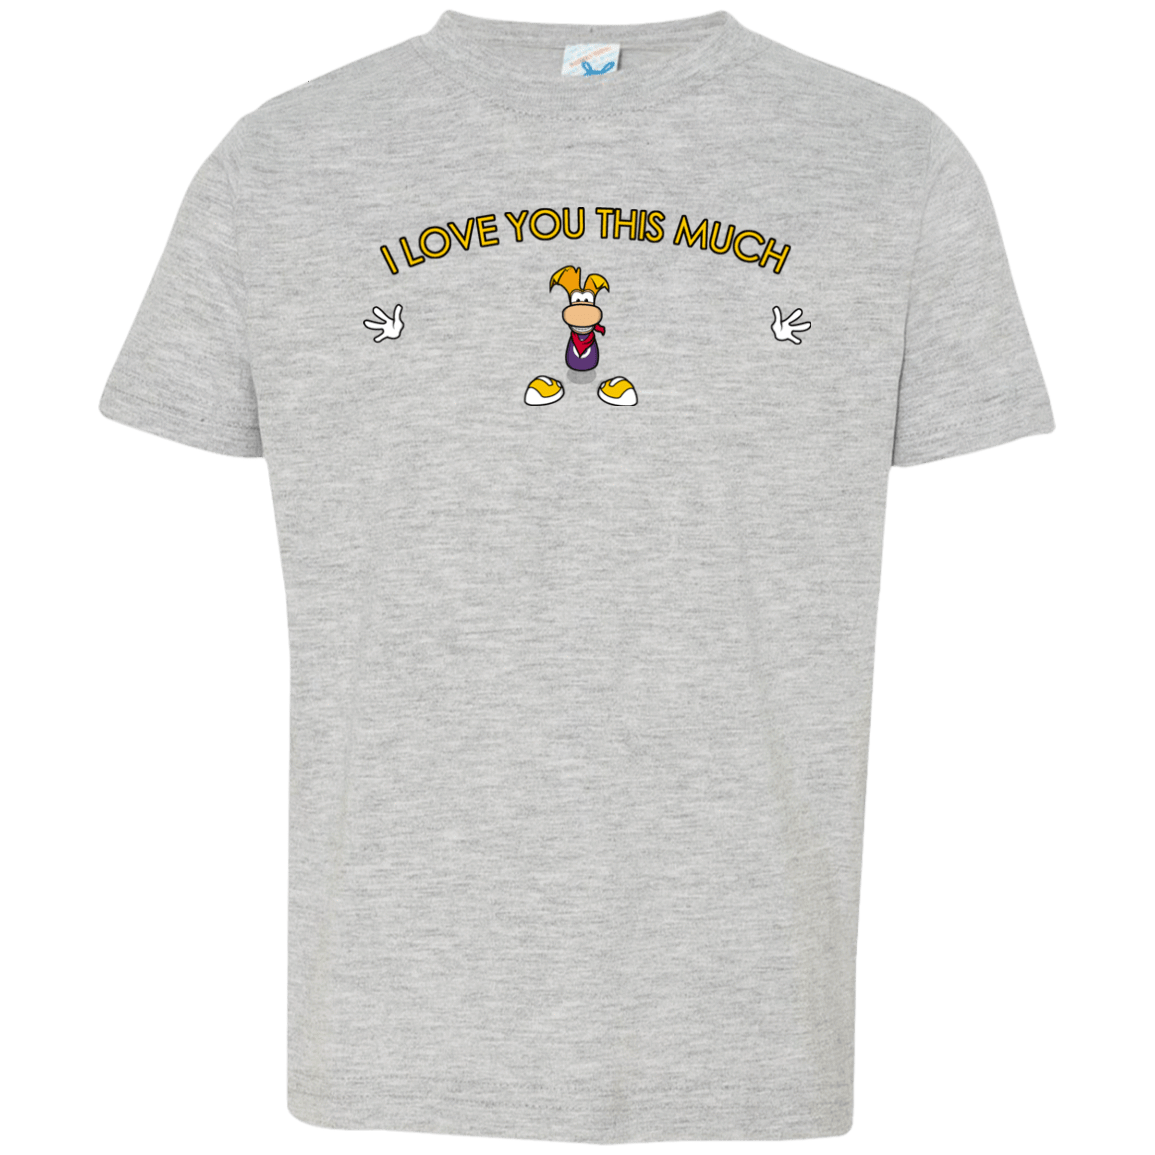 T-Shirts Heather Grey / 2T I Love You This Much Toddler Premium T-Shirt